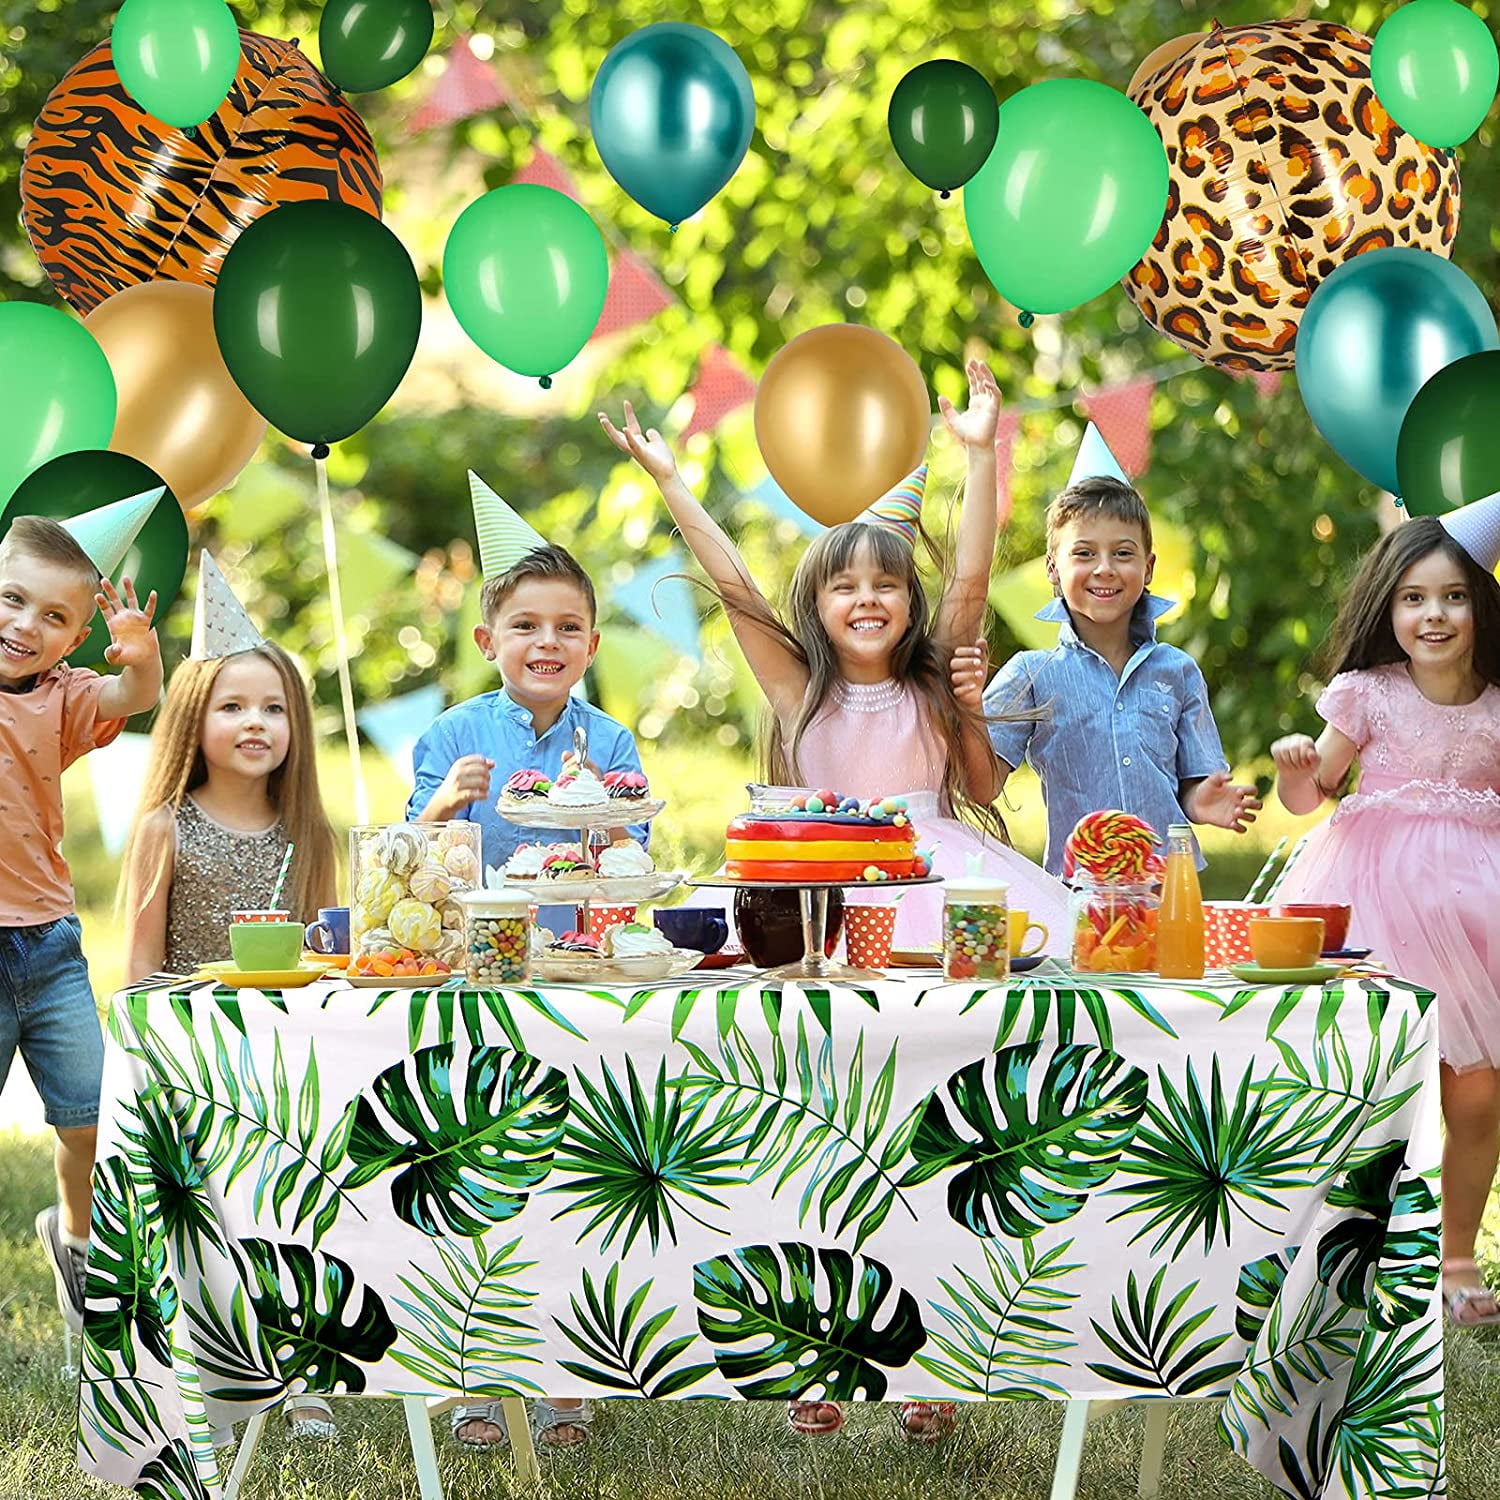 Jungle Safari Theme Party Decoration Include Green Balloons 4D Leopard Foil Balloon Palm Leaf Tablecloth for Jungle Safari Boys and Girls Baby Shower Birthday Party Supplies